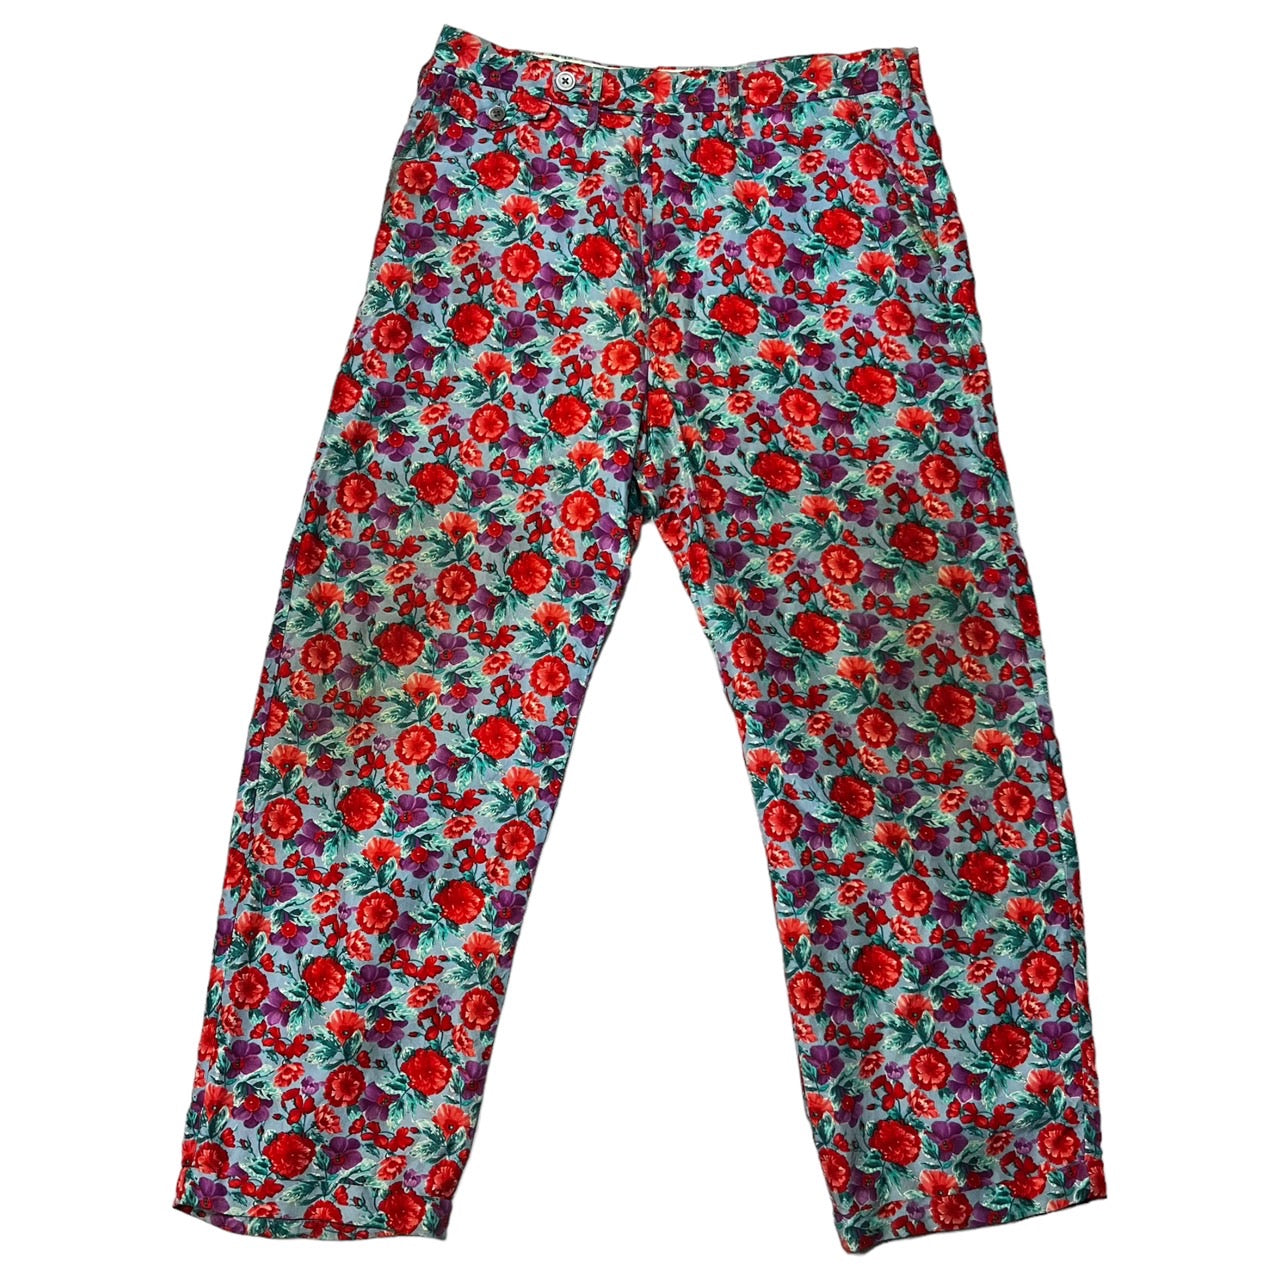 YOHJI YAMAMOTO POUR HOMME(ヨウジヤマモトプールオム) 01SS floral all-over pattern silk slacks/フローラル総柄シルクスラックス/00s/アーカイブ/archives HX-P07-412 SIZE 2(M) レッド×ライトブルー 01SS COLLECTION LOOK #029着用アイテム/稀少品